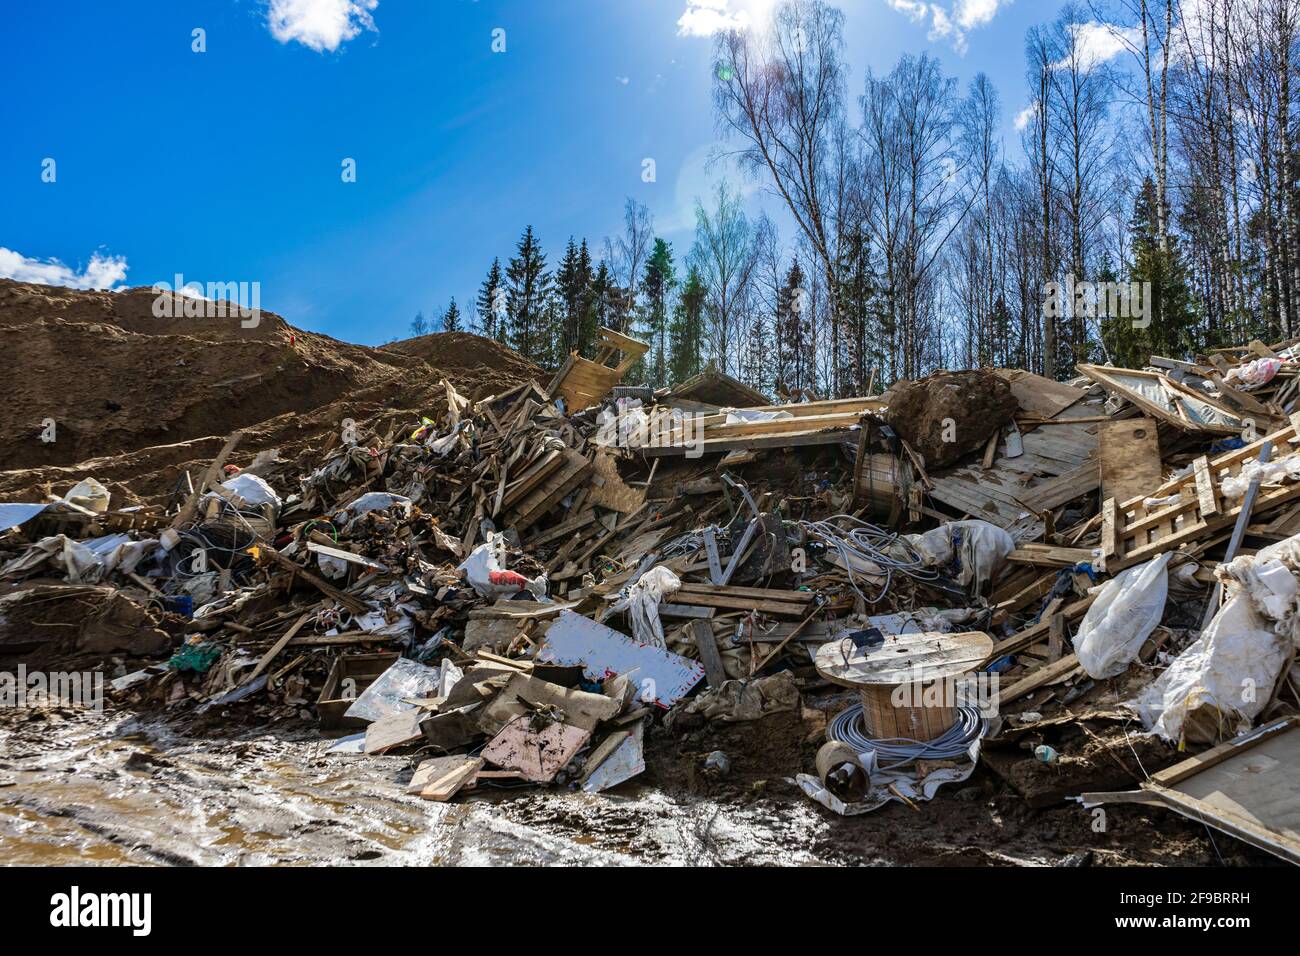 Landfill of construction waste and garbage in nature. Environmental pollution. Illegal construction waste dump Stock Photo